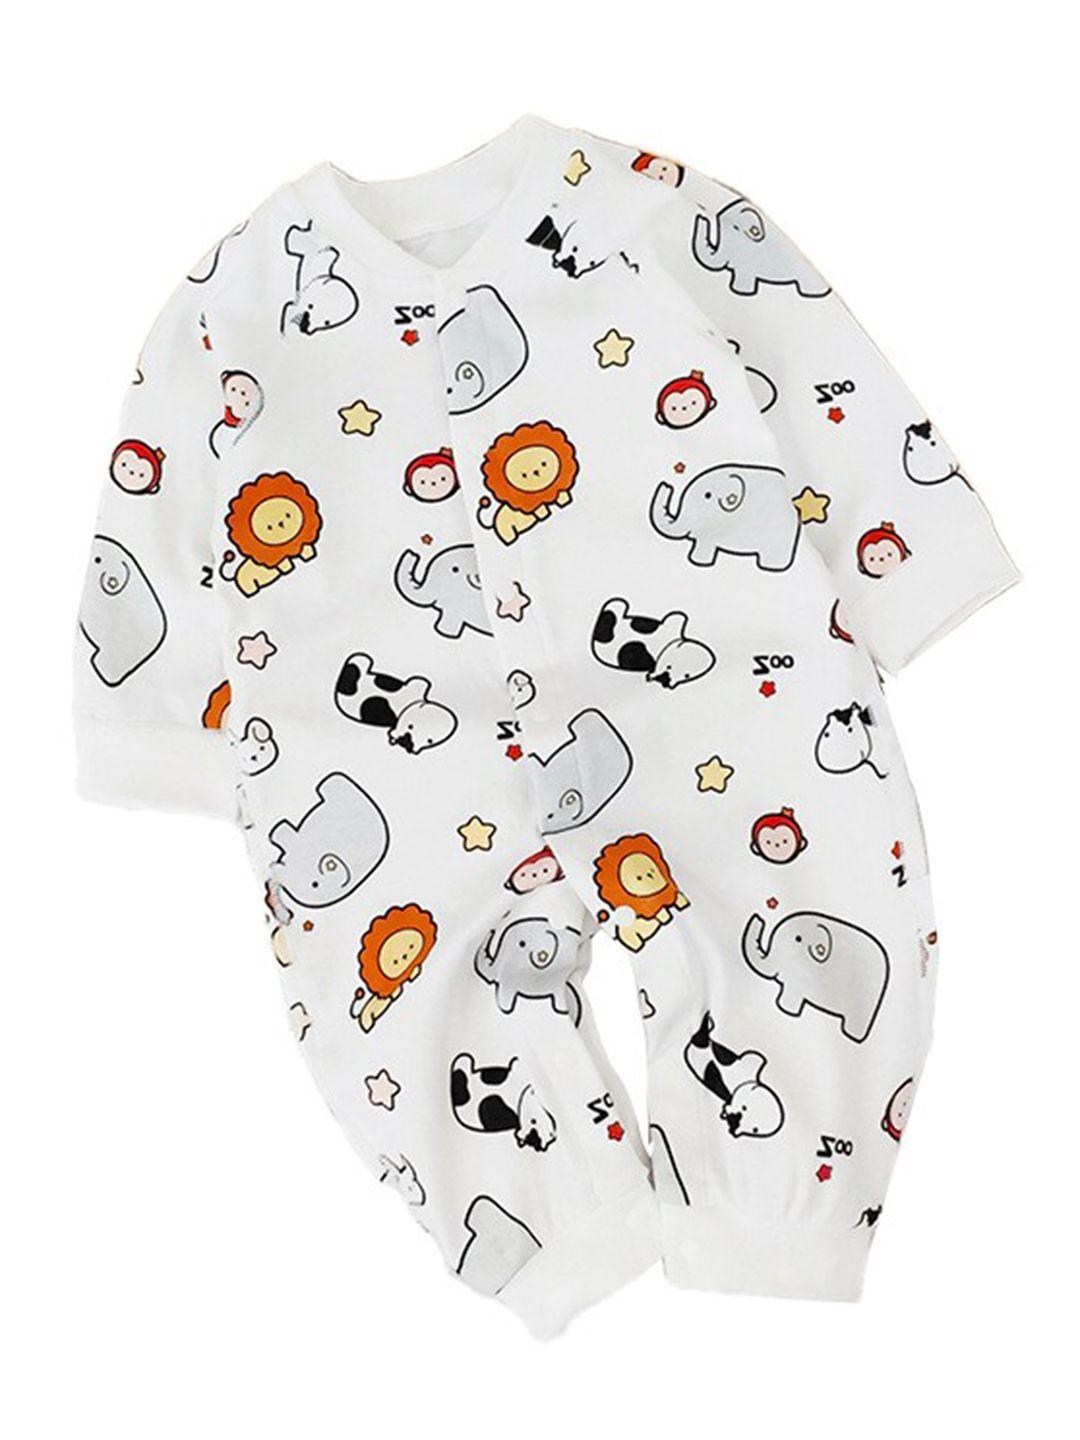 stylecast infants boys white printed cotton rompers